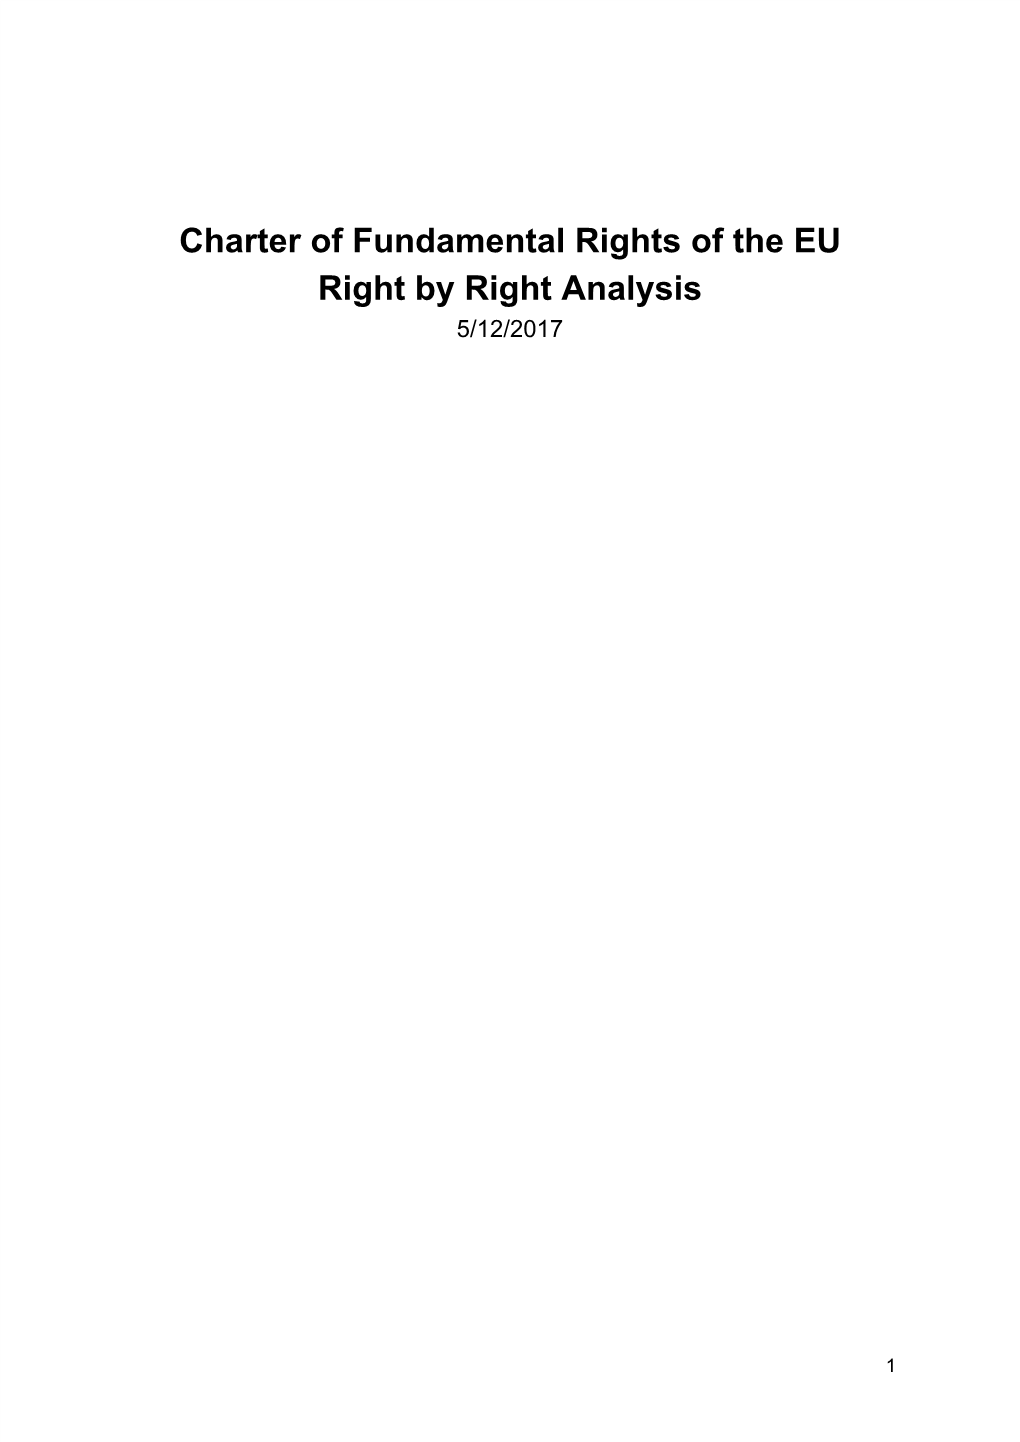 Charter of Fundamental Rights of the EU Right by Right Analysis